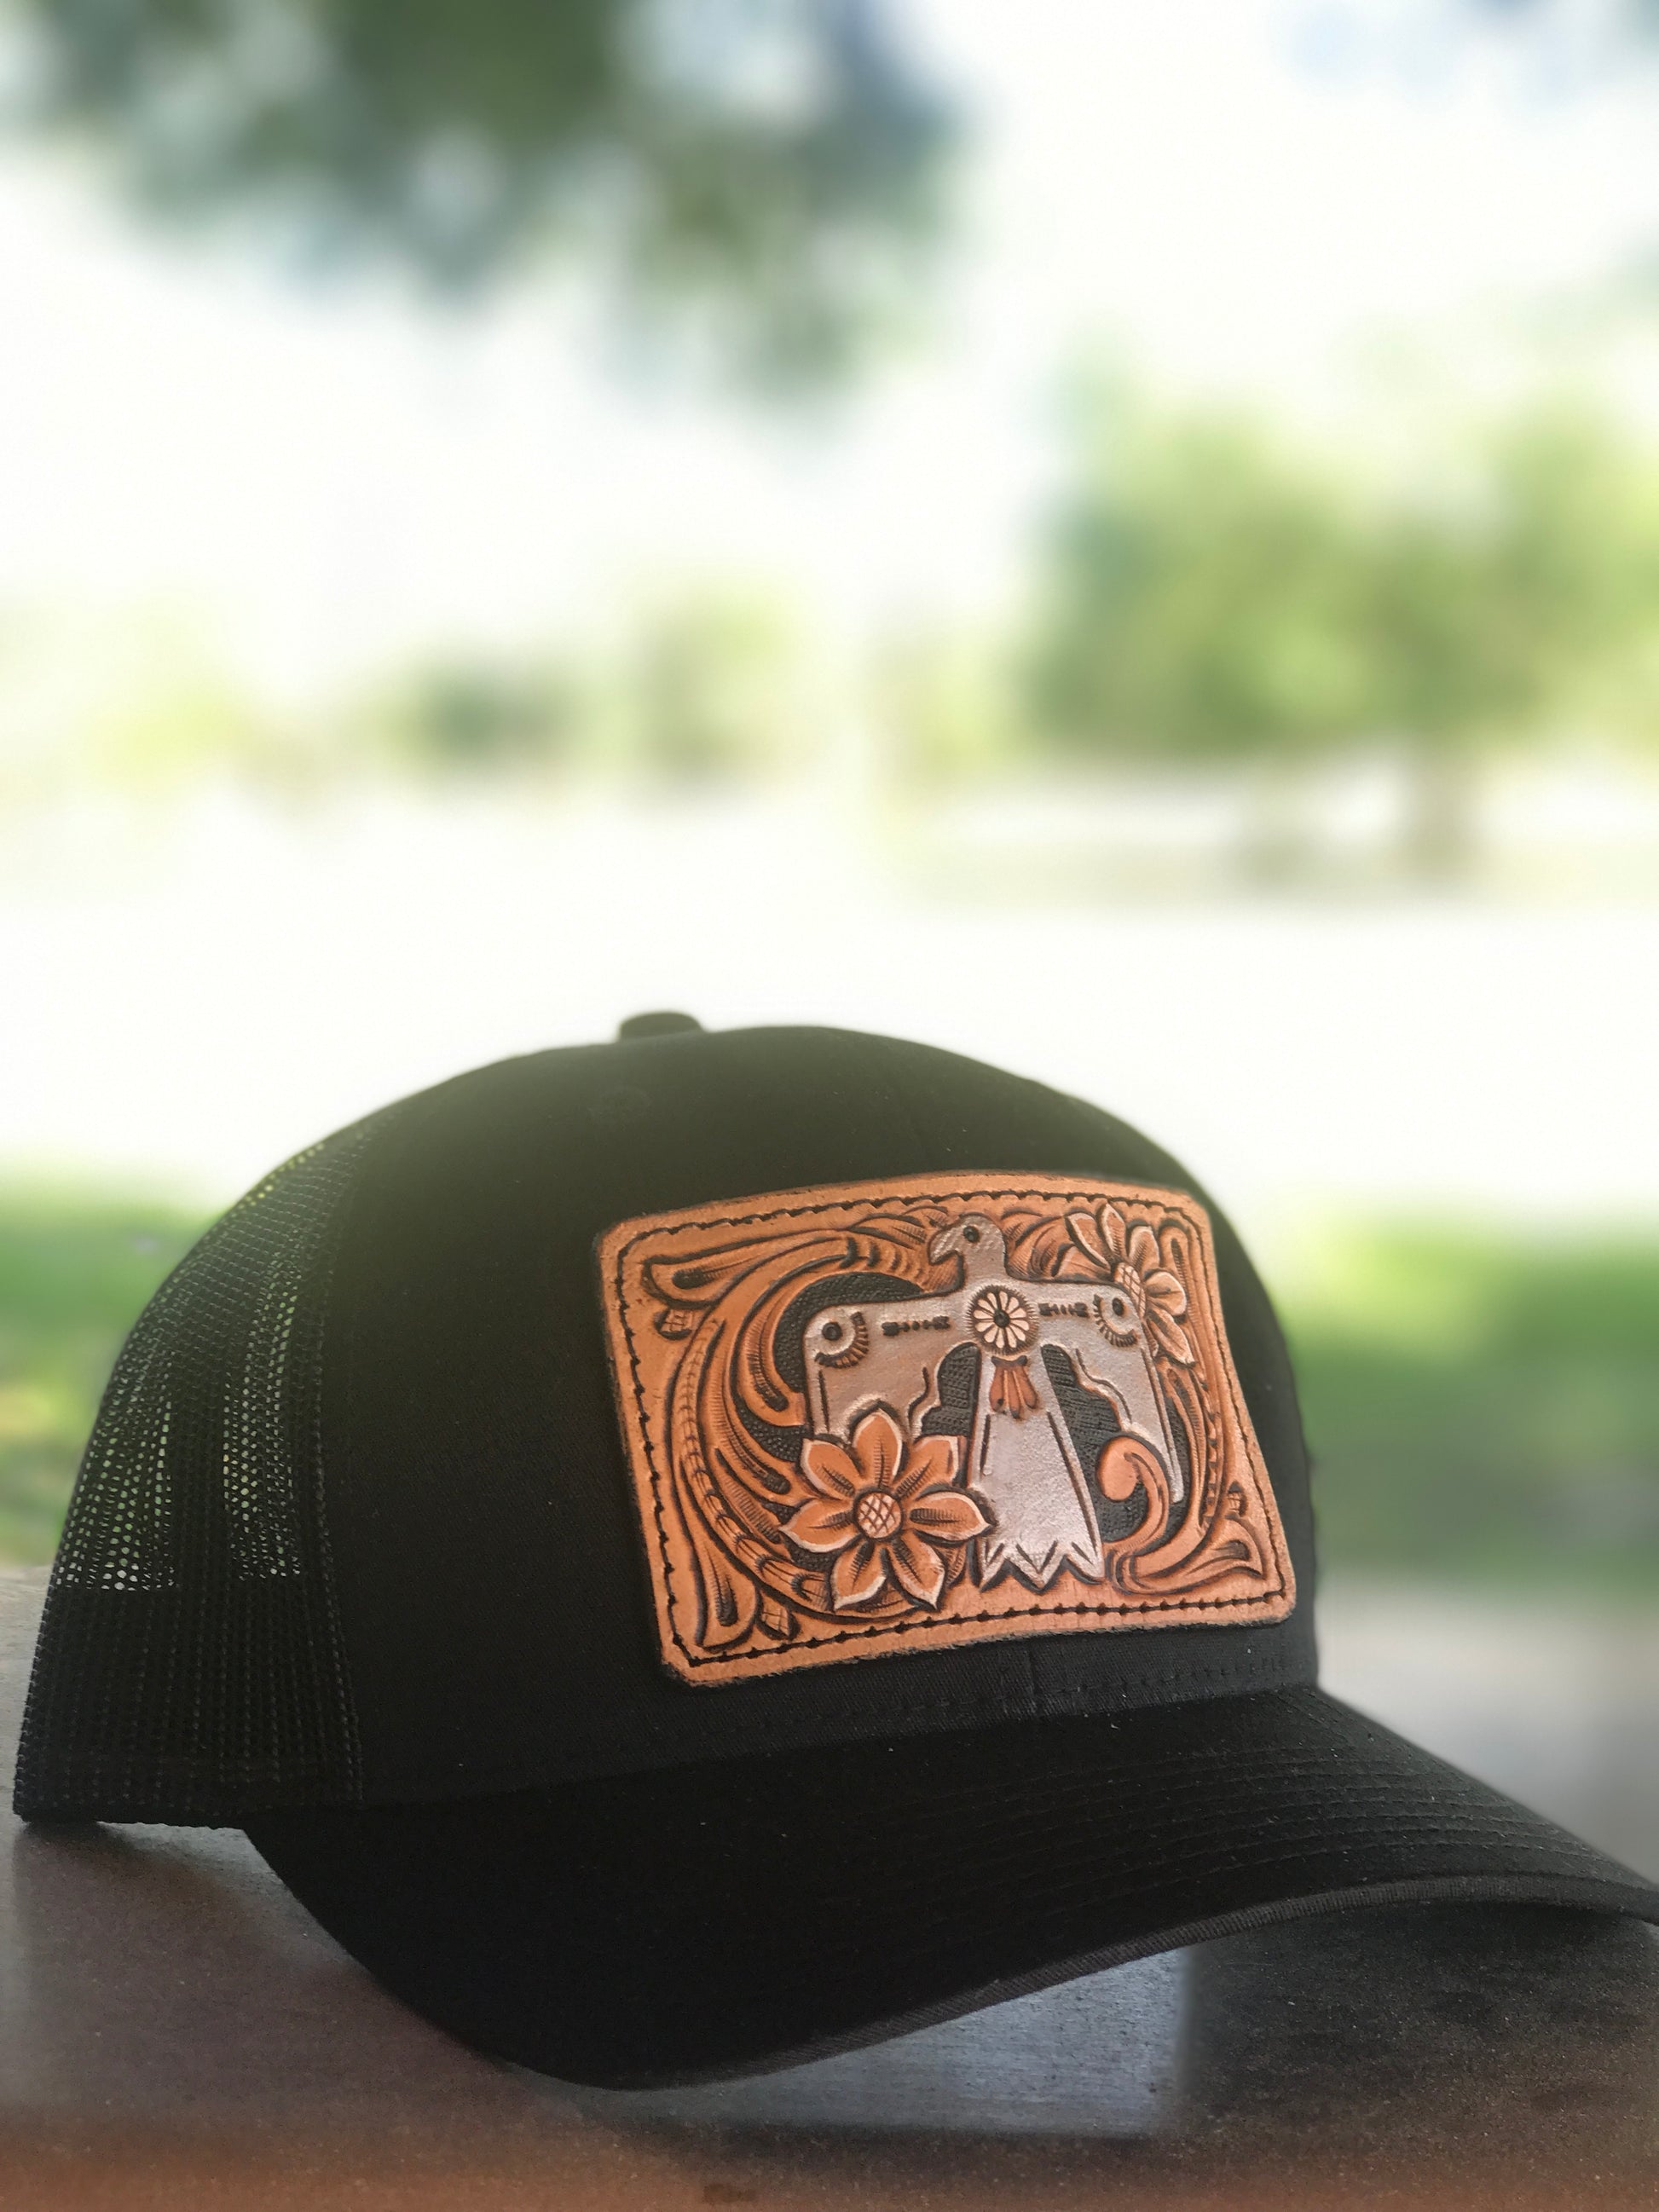 CUSTOM tooled hat patch. MADE RO ORDER – Lazy K Leather